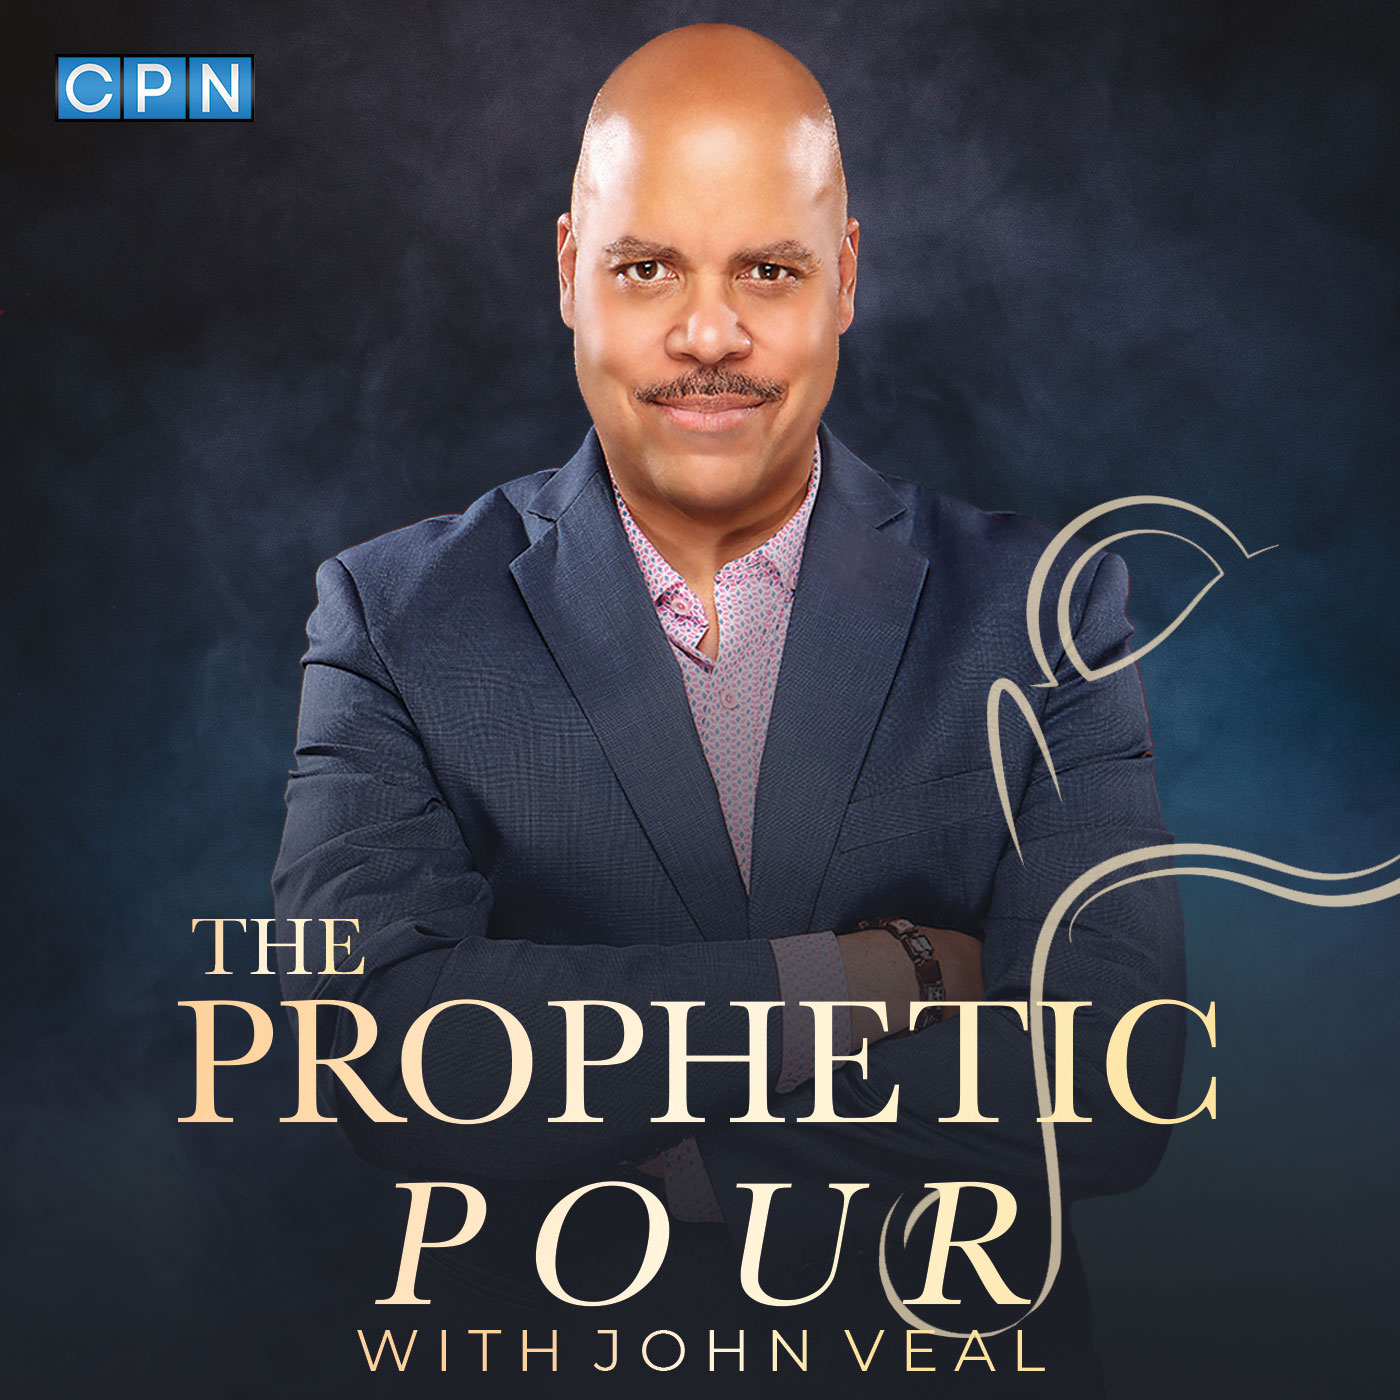 Did The Prophetic Word You Received Come From A Prophet Or A Psychic? (How To Tell The Difference)